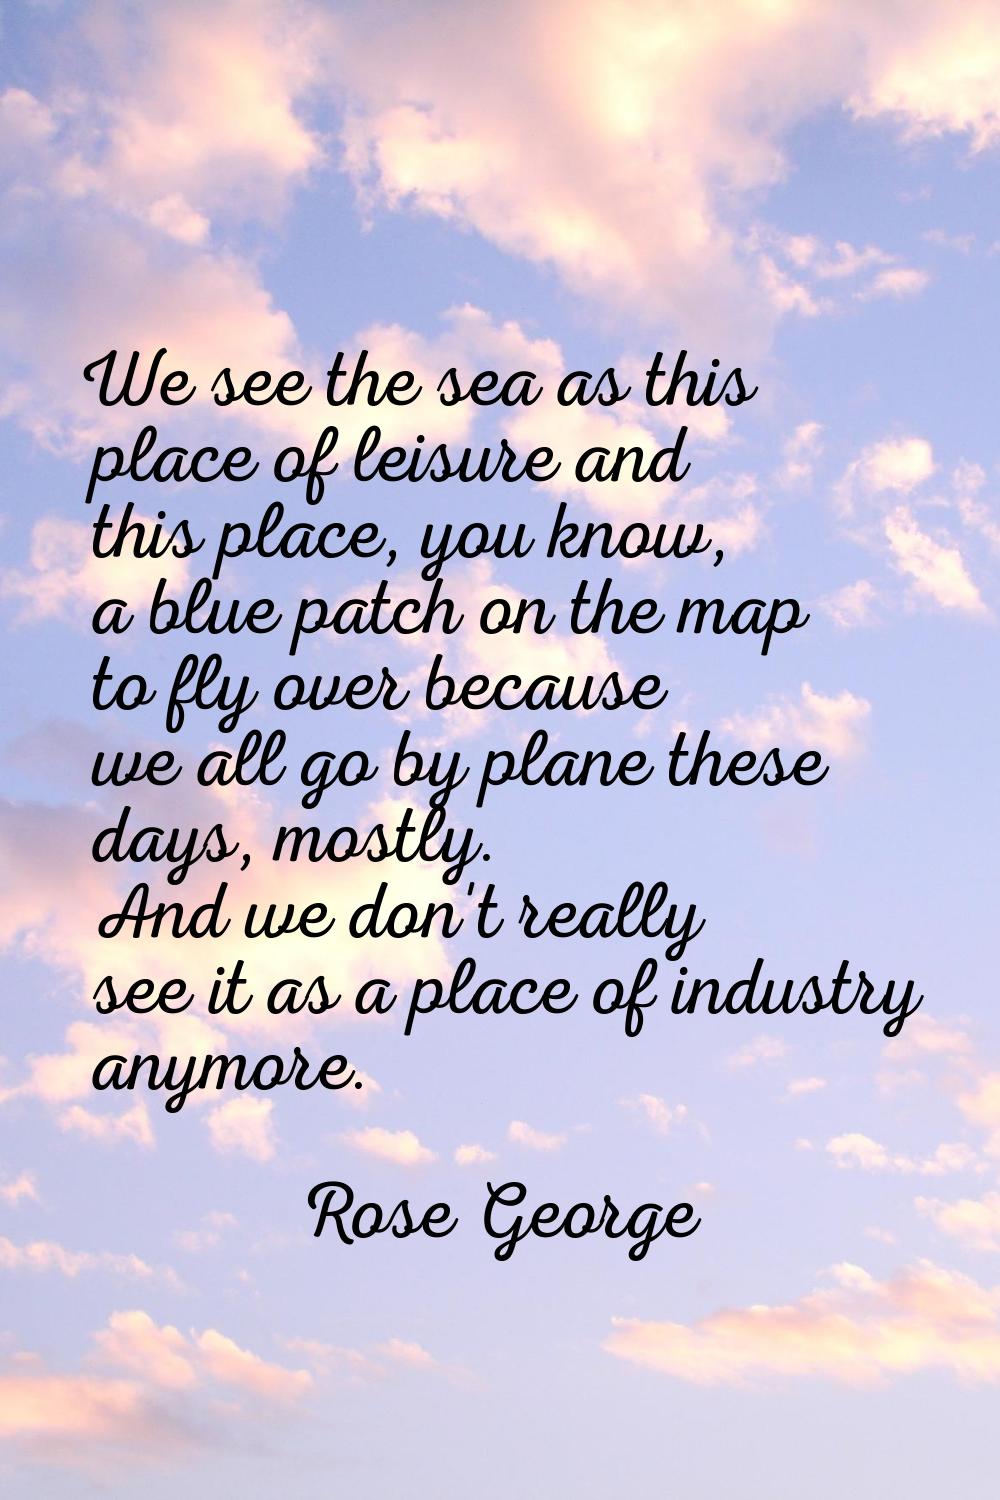 We see the sea as this place of leisure and this place, you know, a blue patch on the map to fly ov